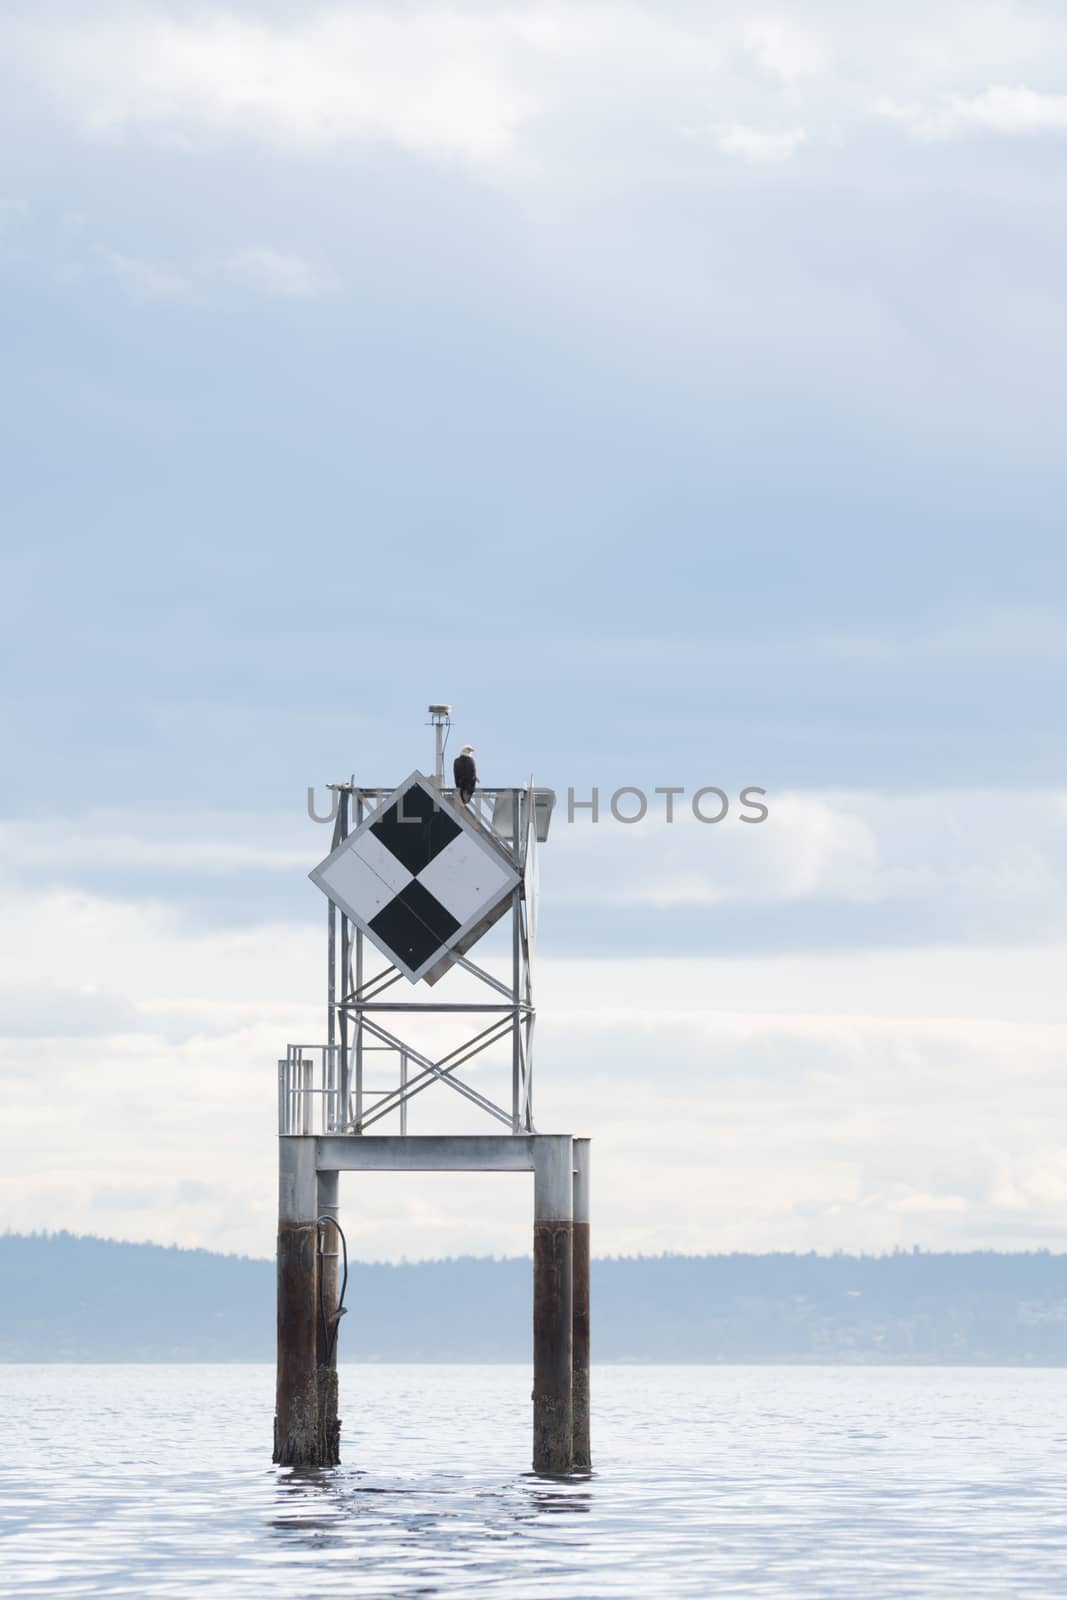 Calm, cloudy day.  Daymark positioned in West Seattle, WA.  The bald eagle was a bonus